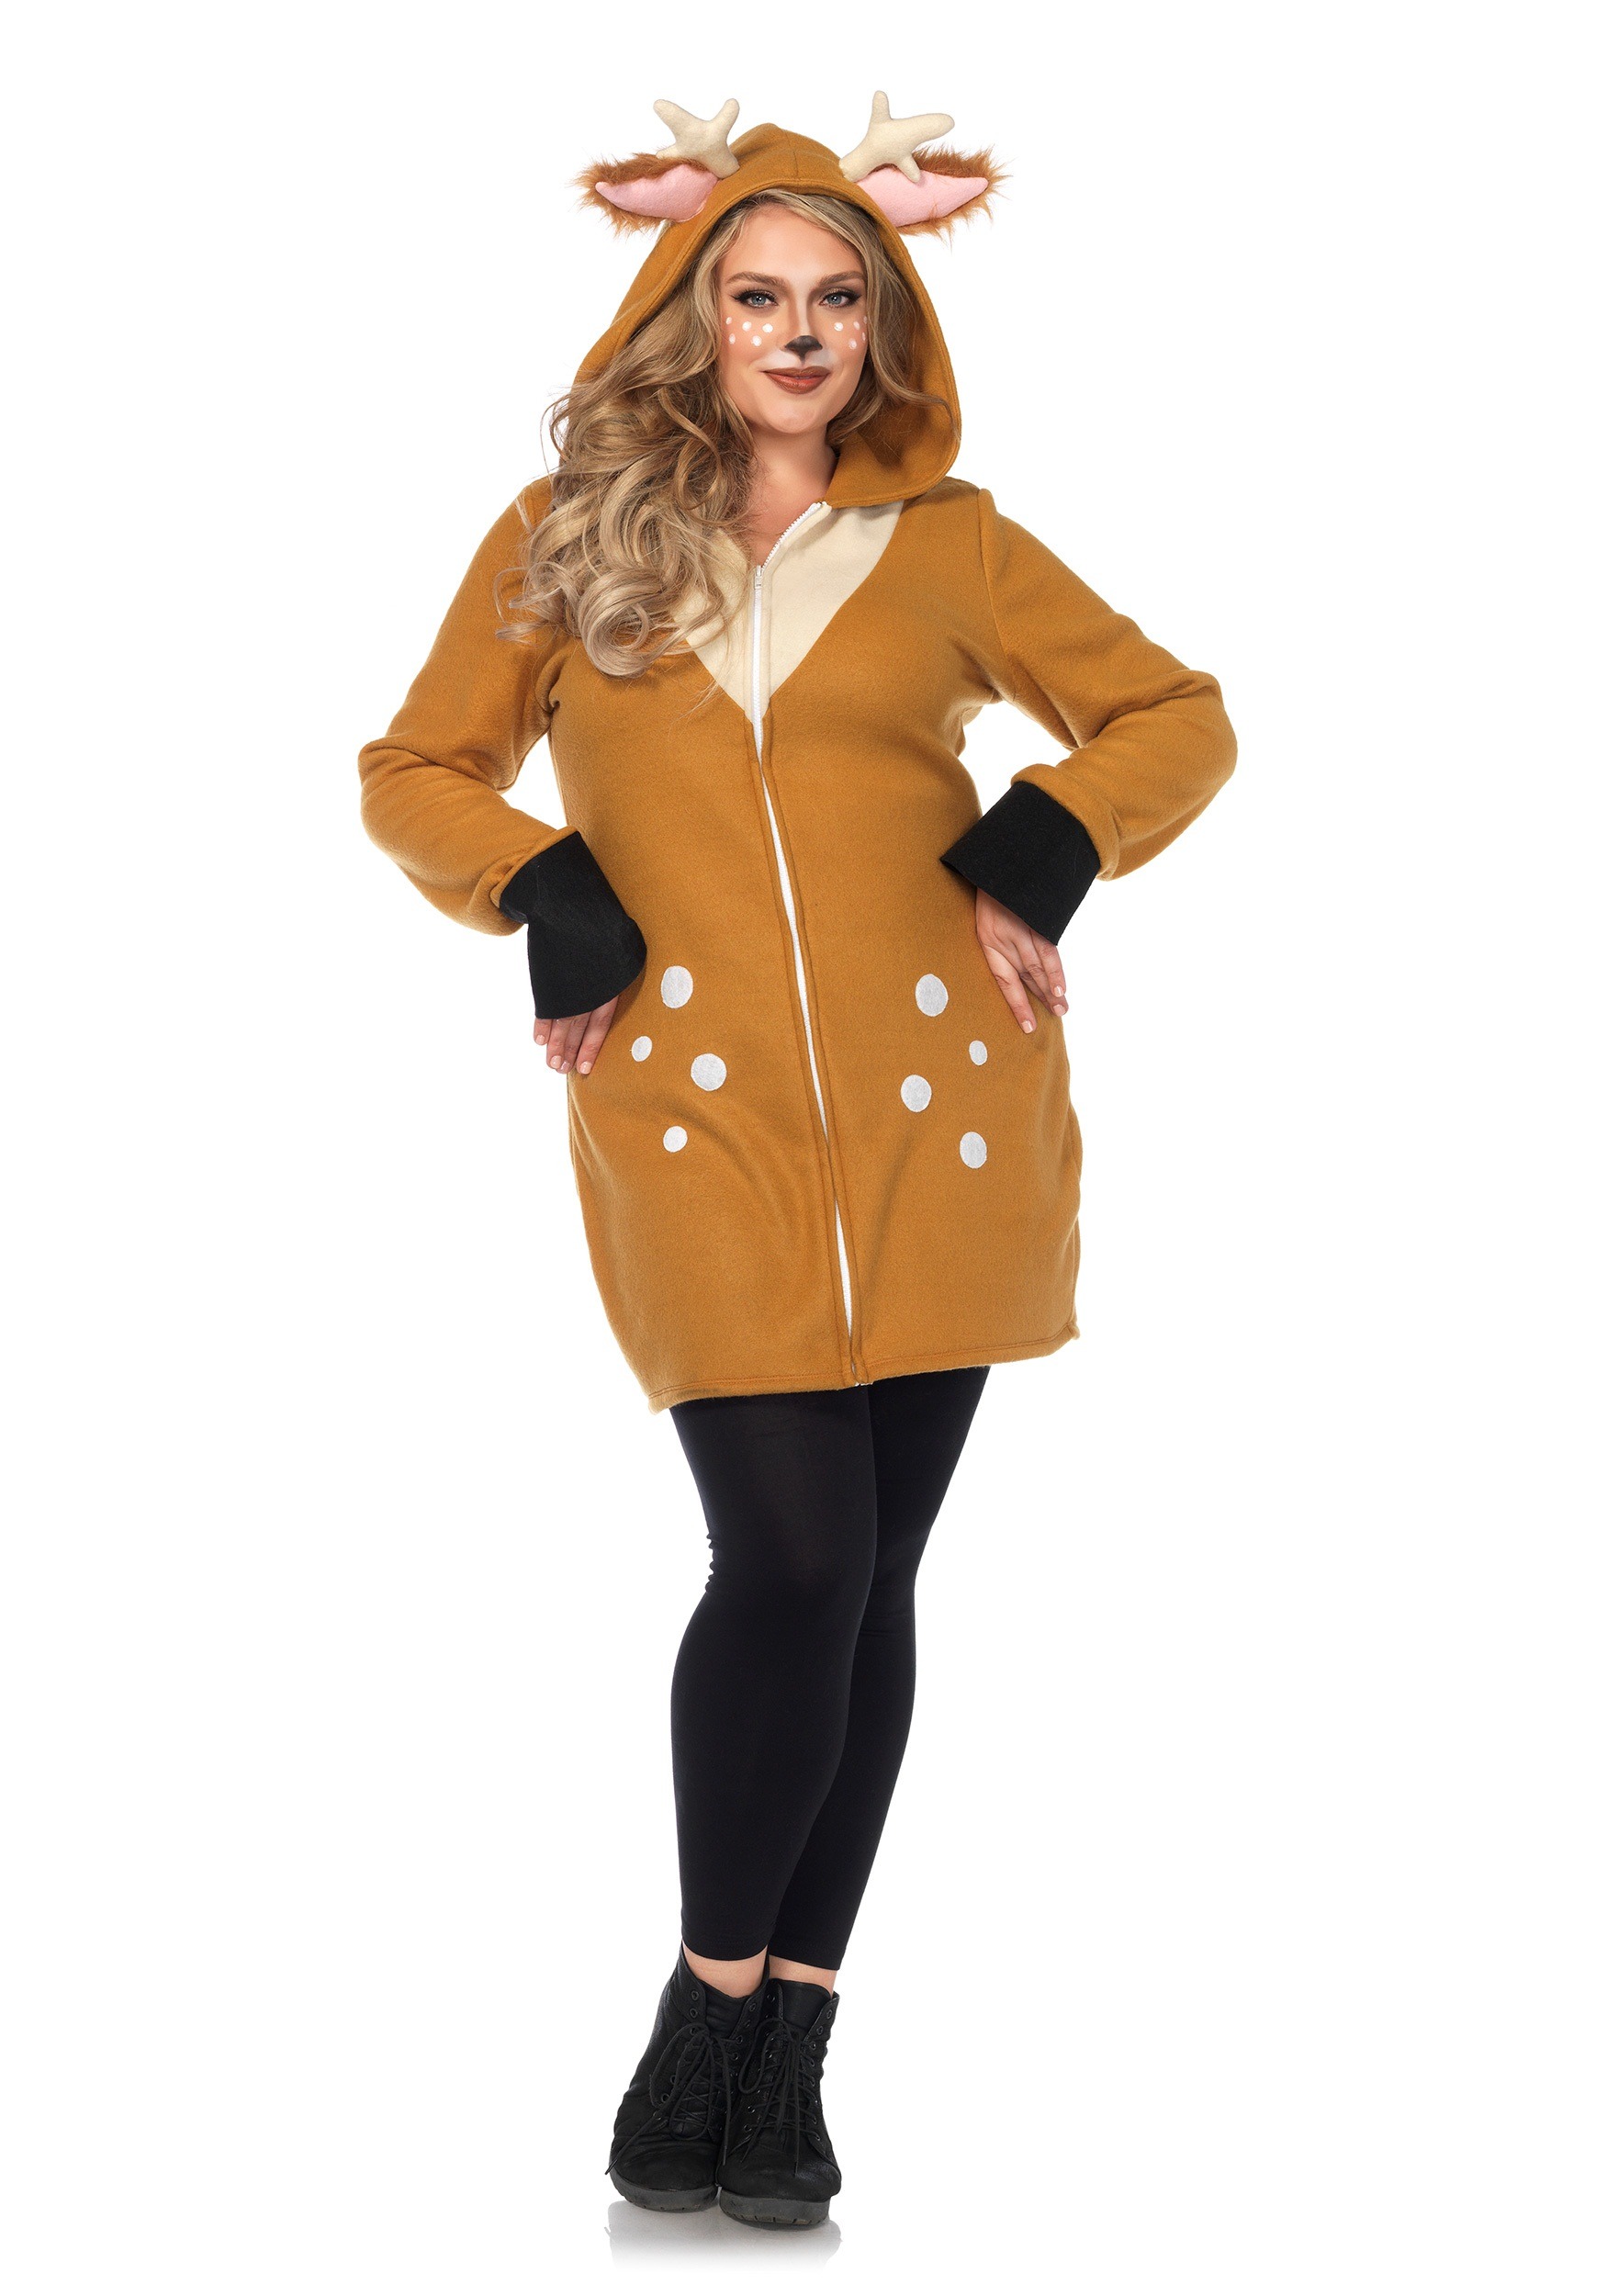 Adult's Plus Size Cozy Fawn Costume